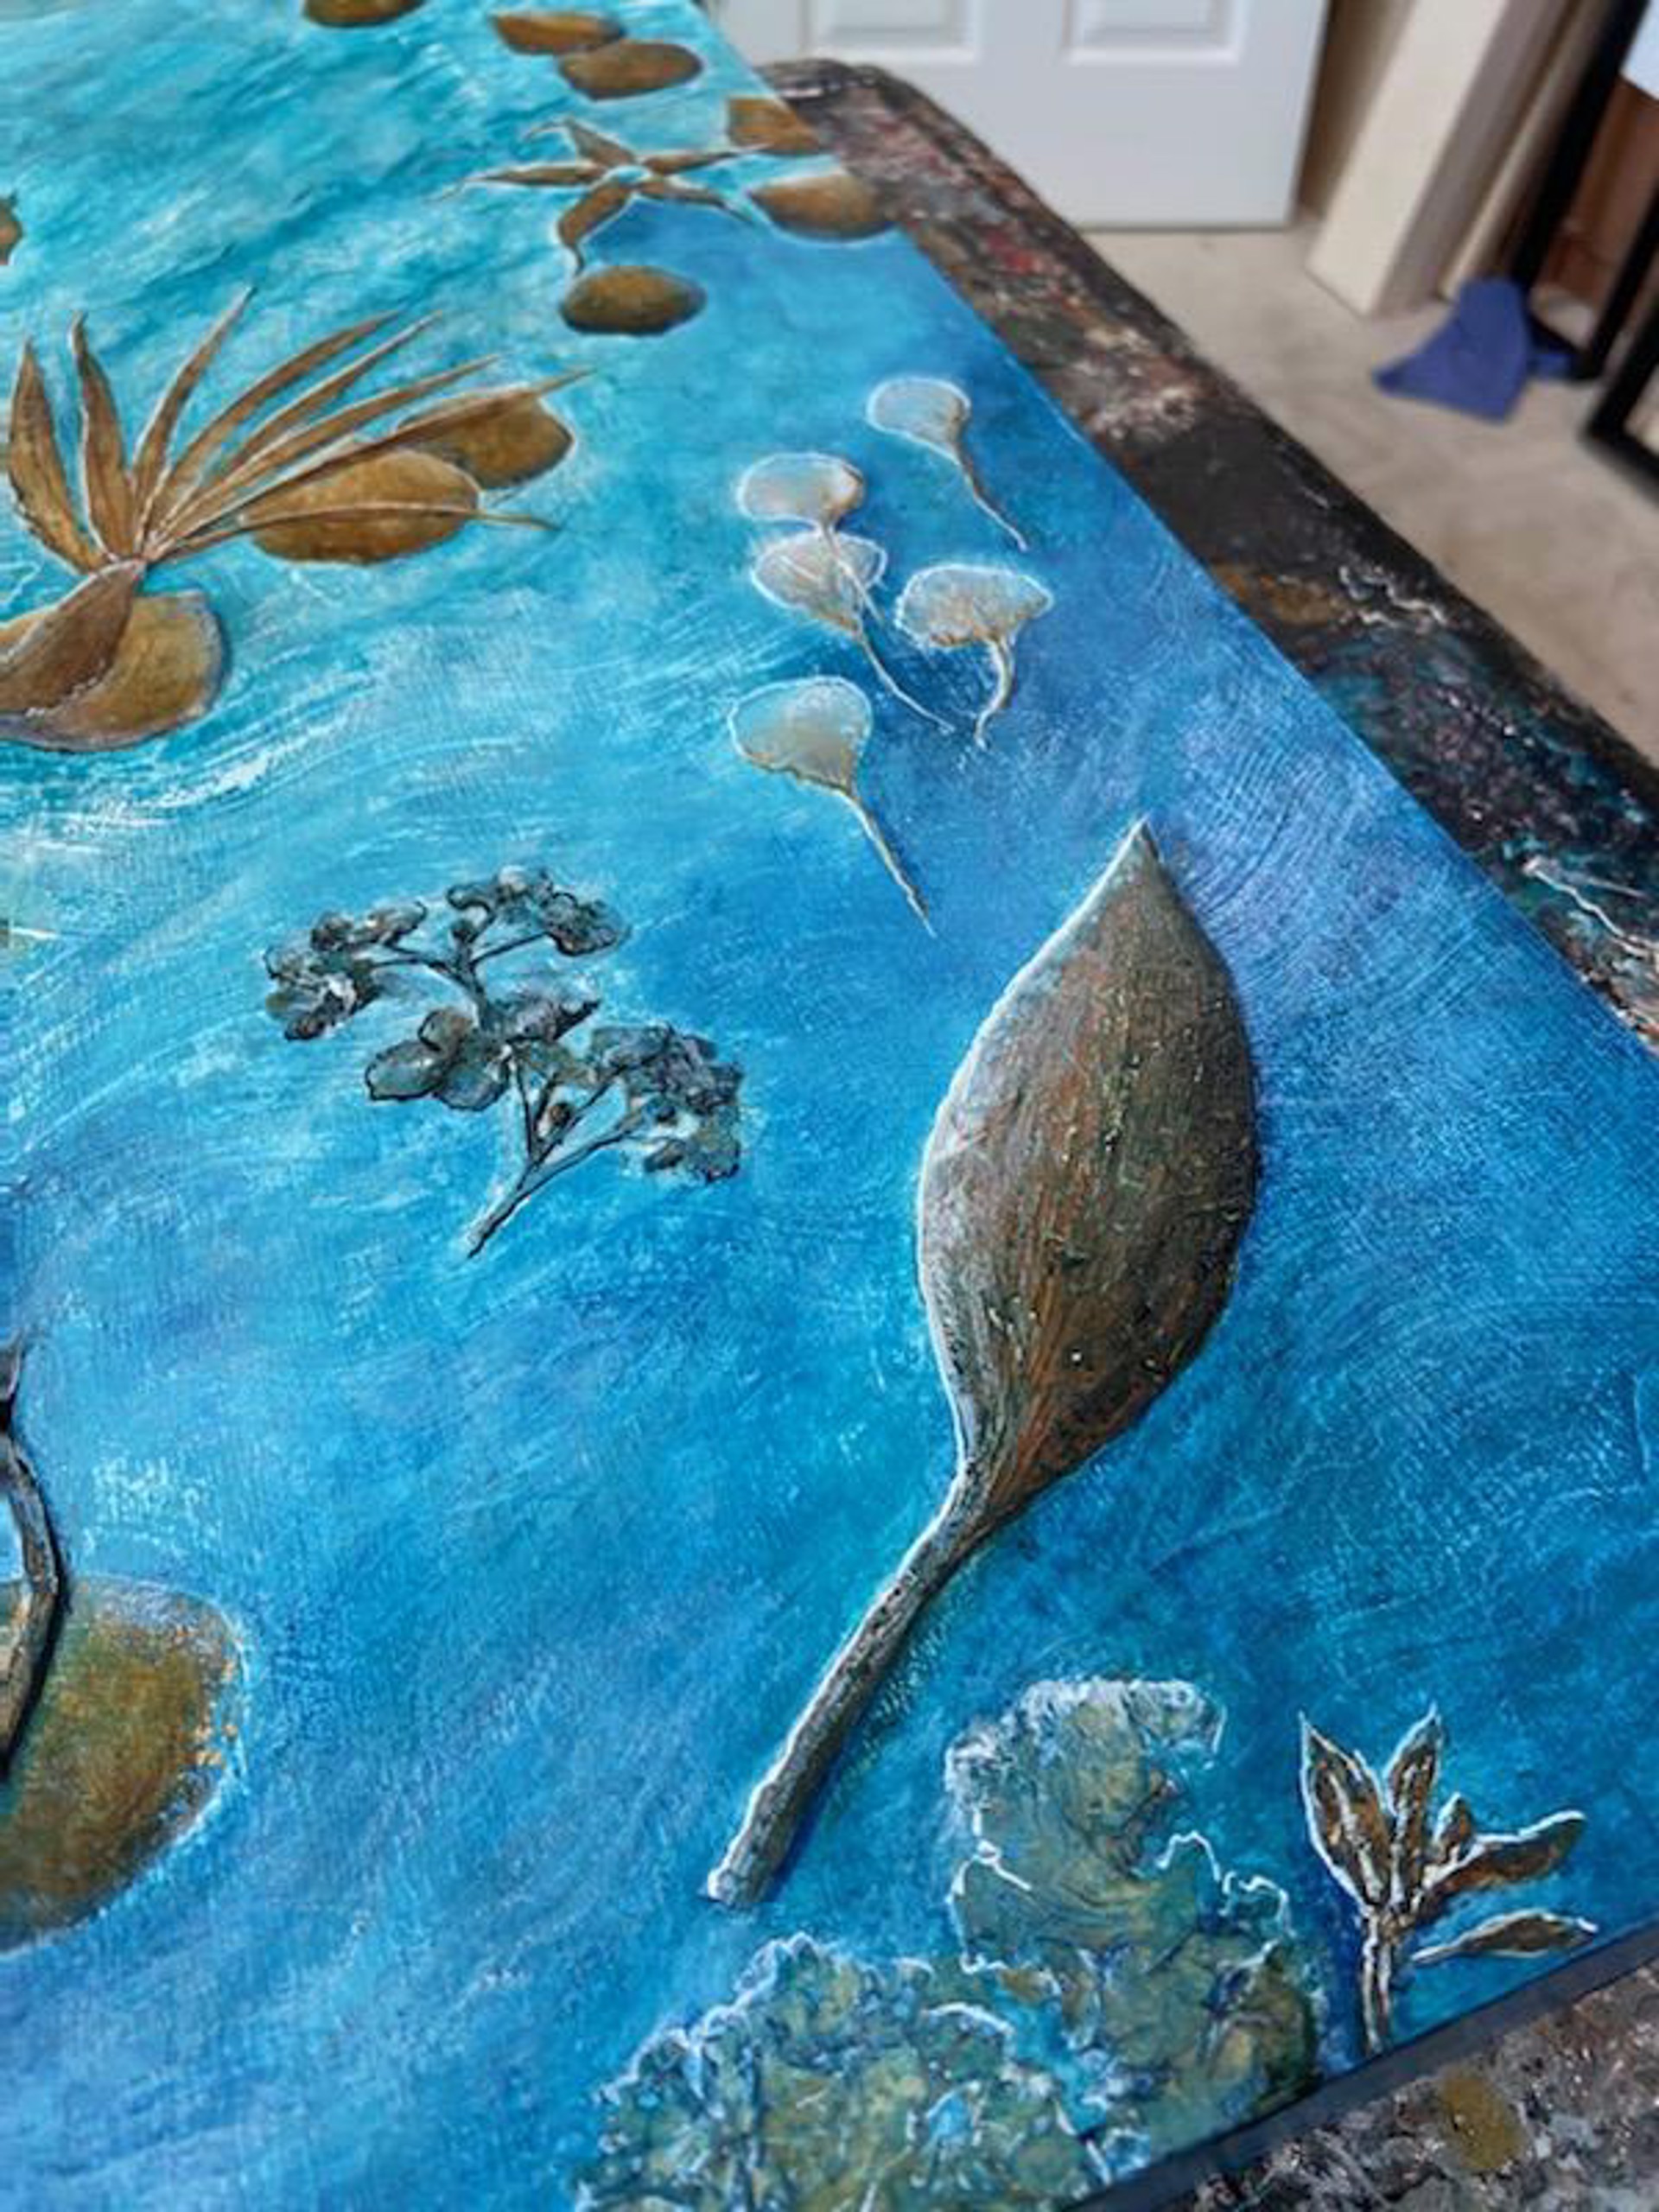 Woodstrom Commission ~ Under the Sea by Kim Walker